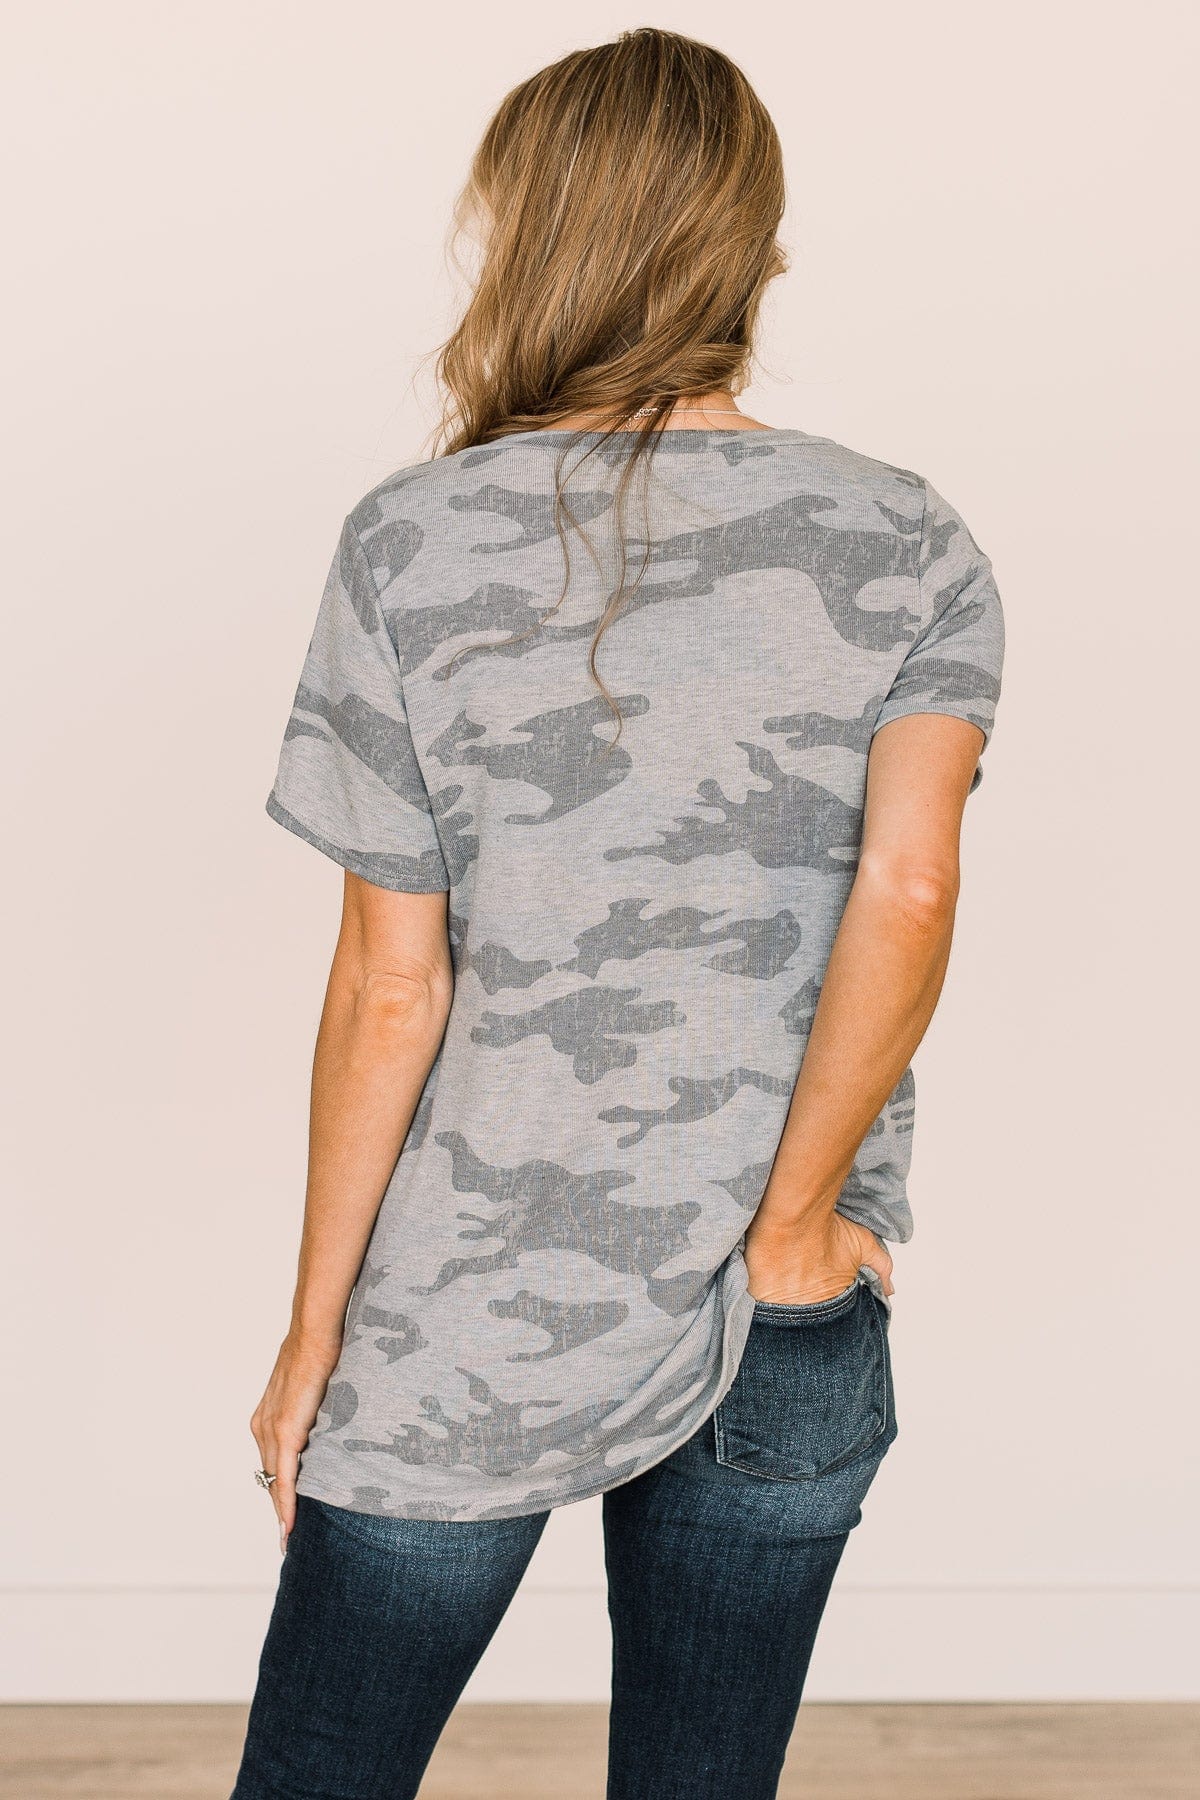 See The Big Picture V-Neck Top- Light Camo